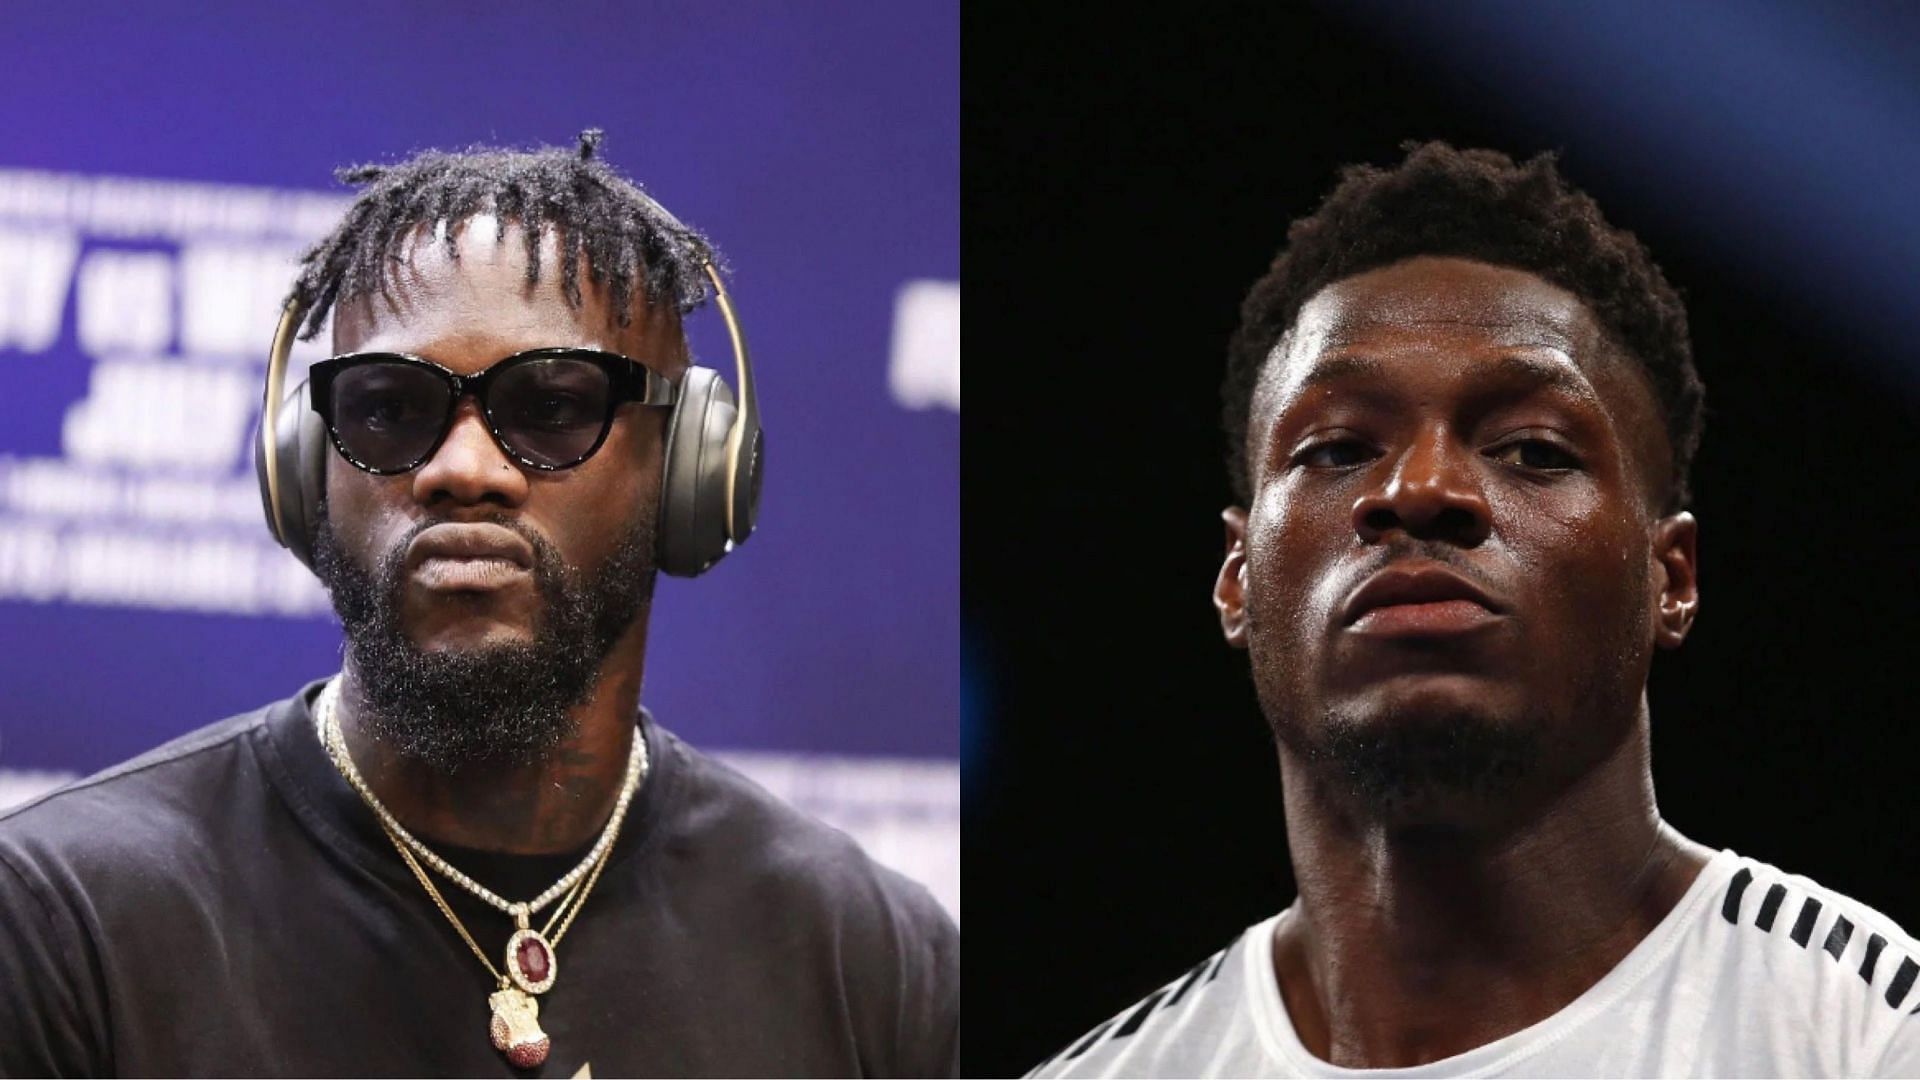 Deontay Wilder (left), Marsellos Wilder (right) [images courtesy of Getty]